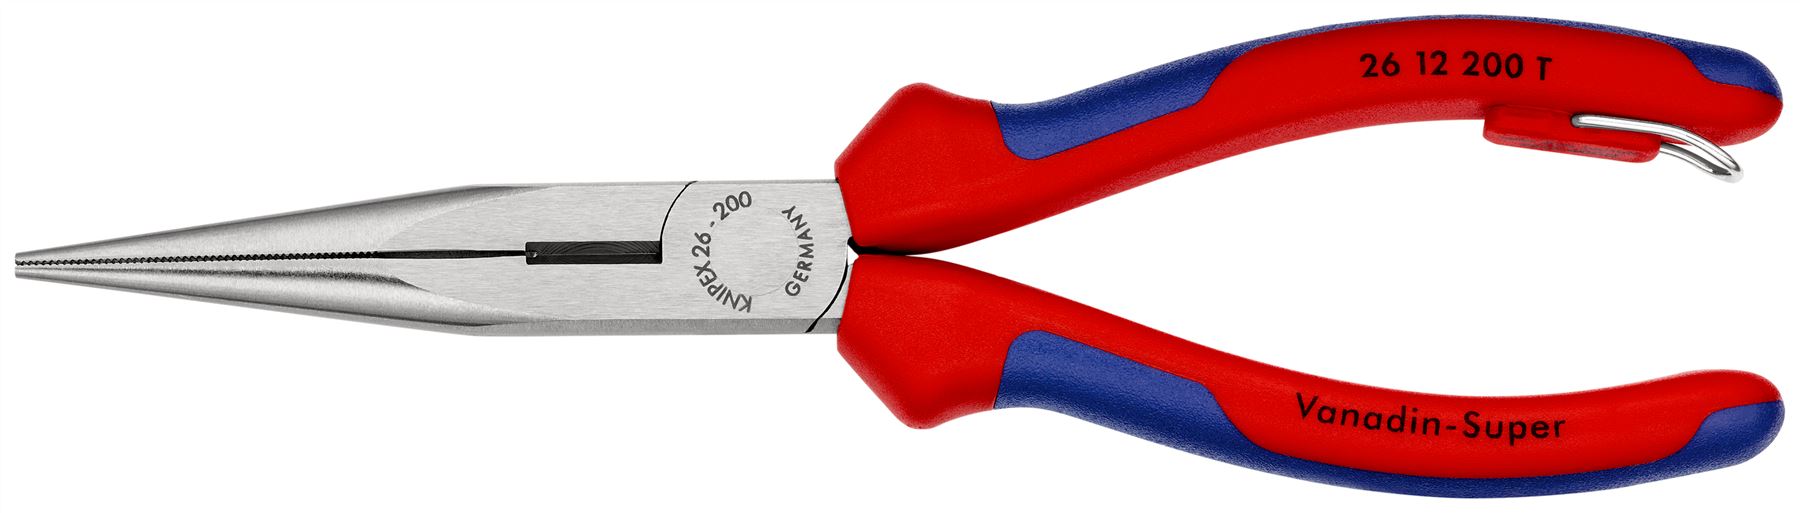 Knipex Snipe Nose Side Cutting Pliers 200mm Multi Component Grips with Tether Point 26 12 200 T